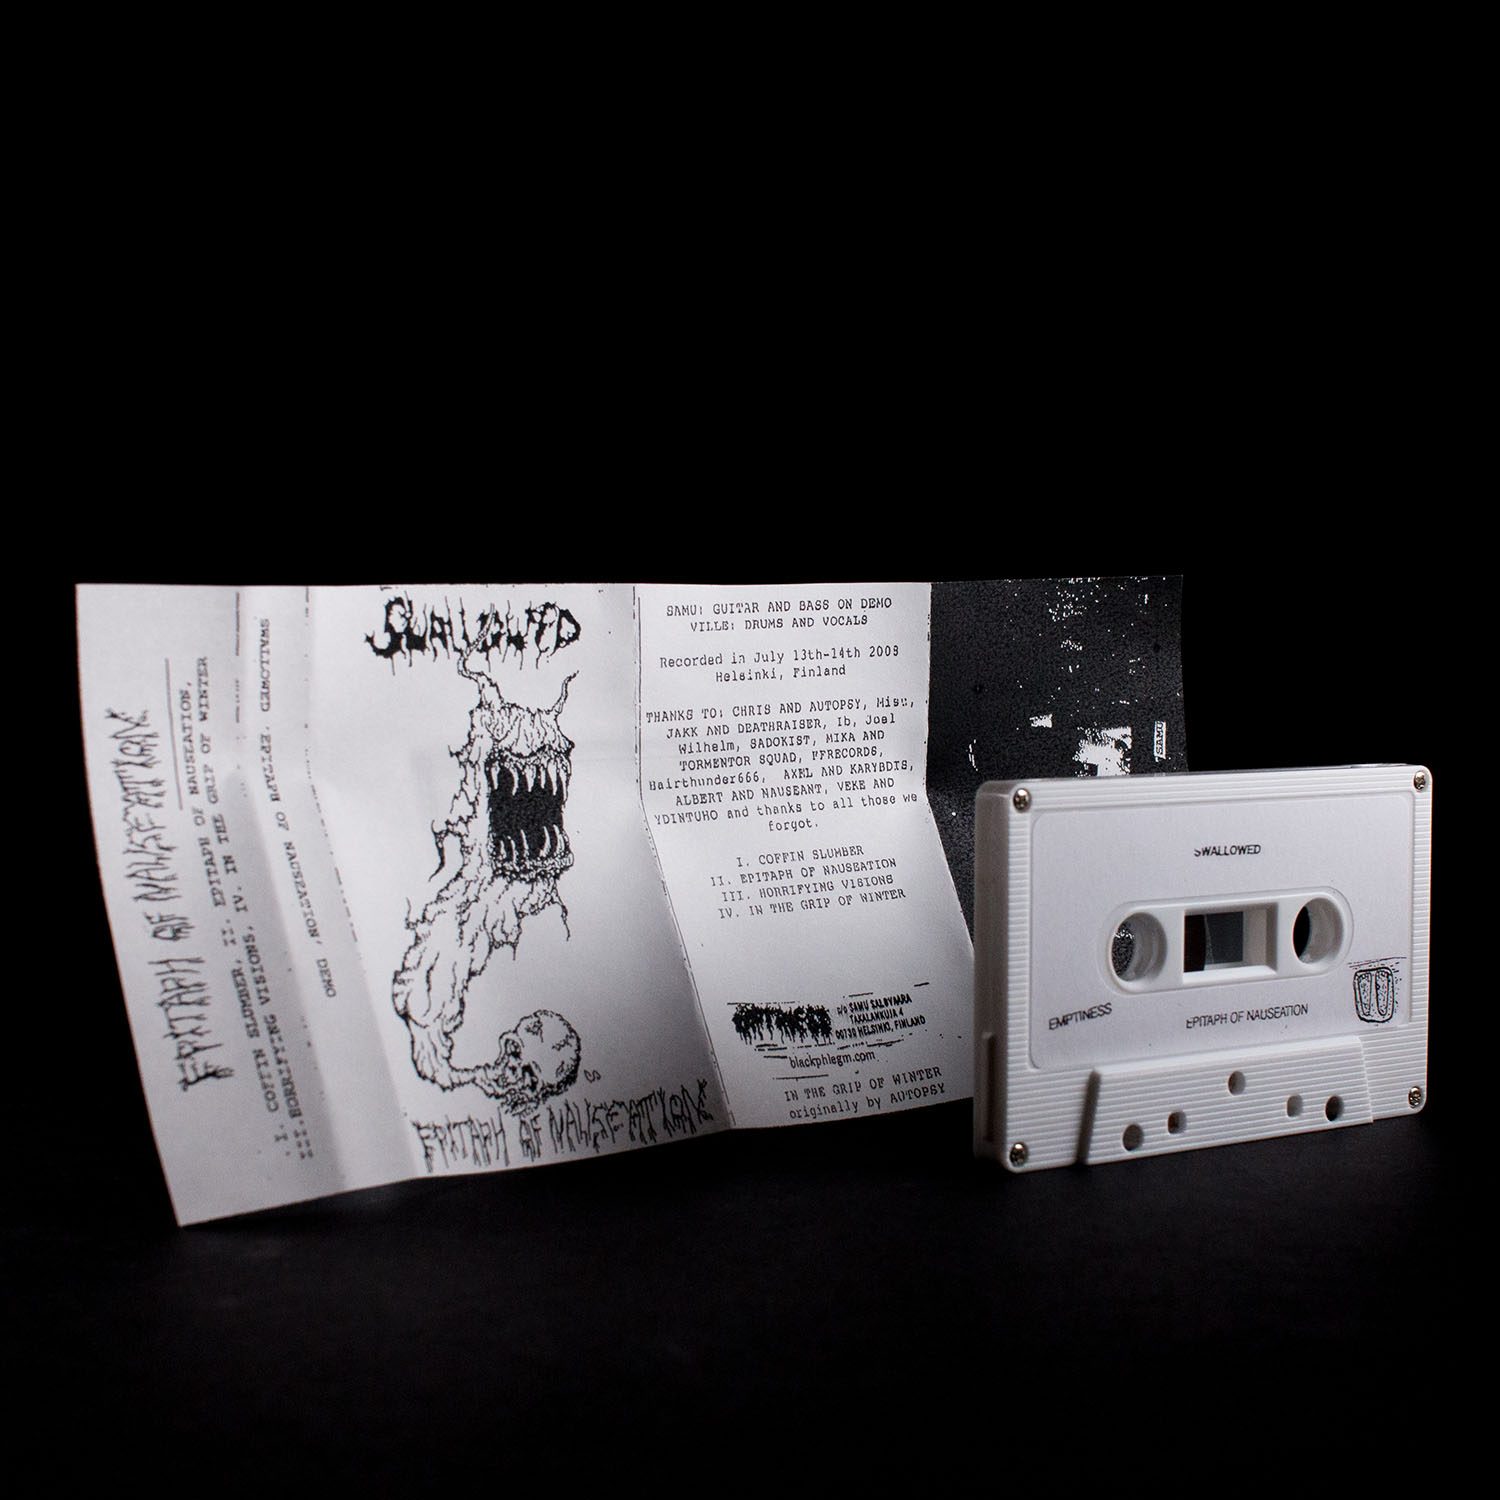 Swallowed | Epitaph Of Nauseation | Cassette